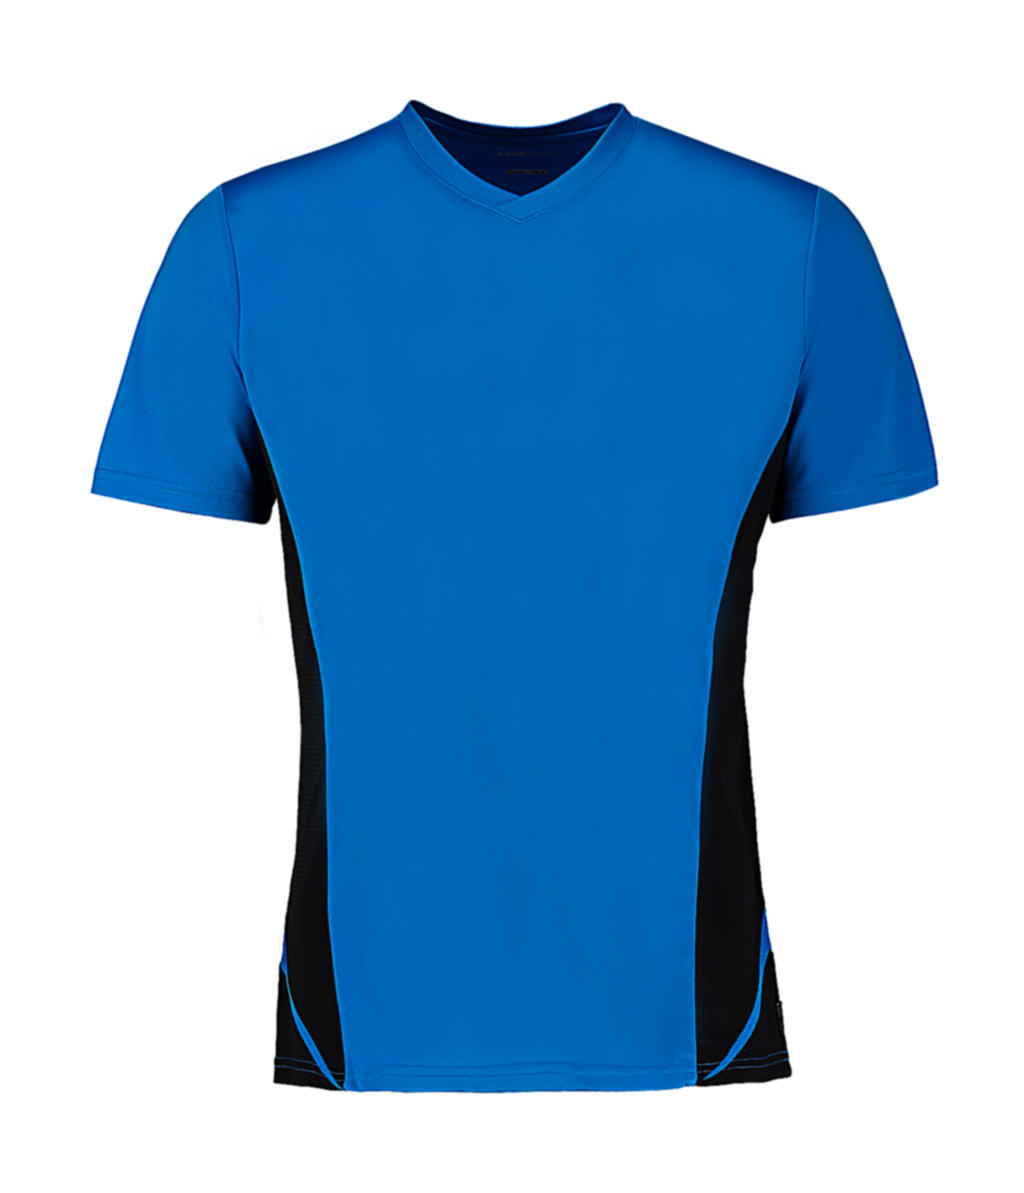  Regular Fit Cooltex? Panel V Neck Tee in Farbe Electric Blue/Black